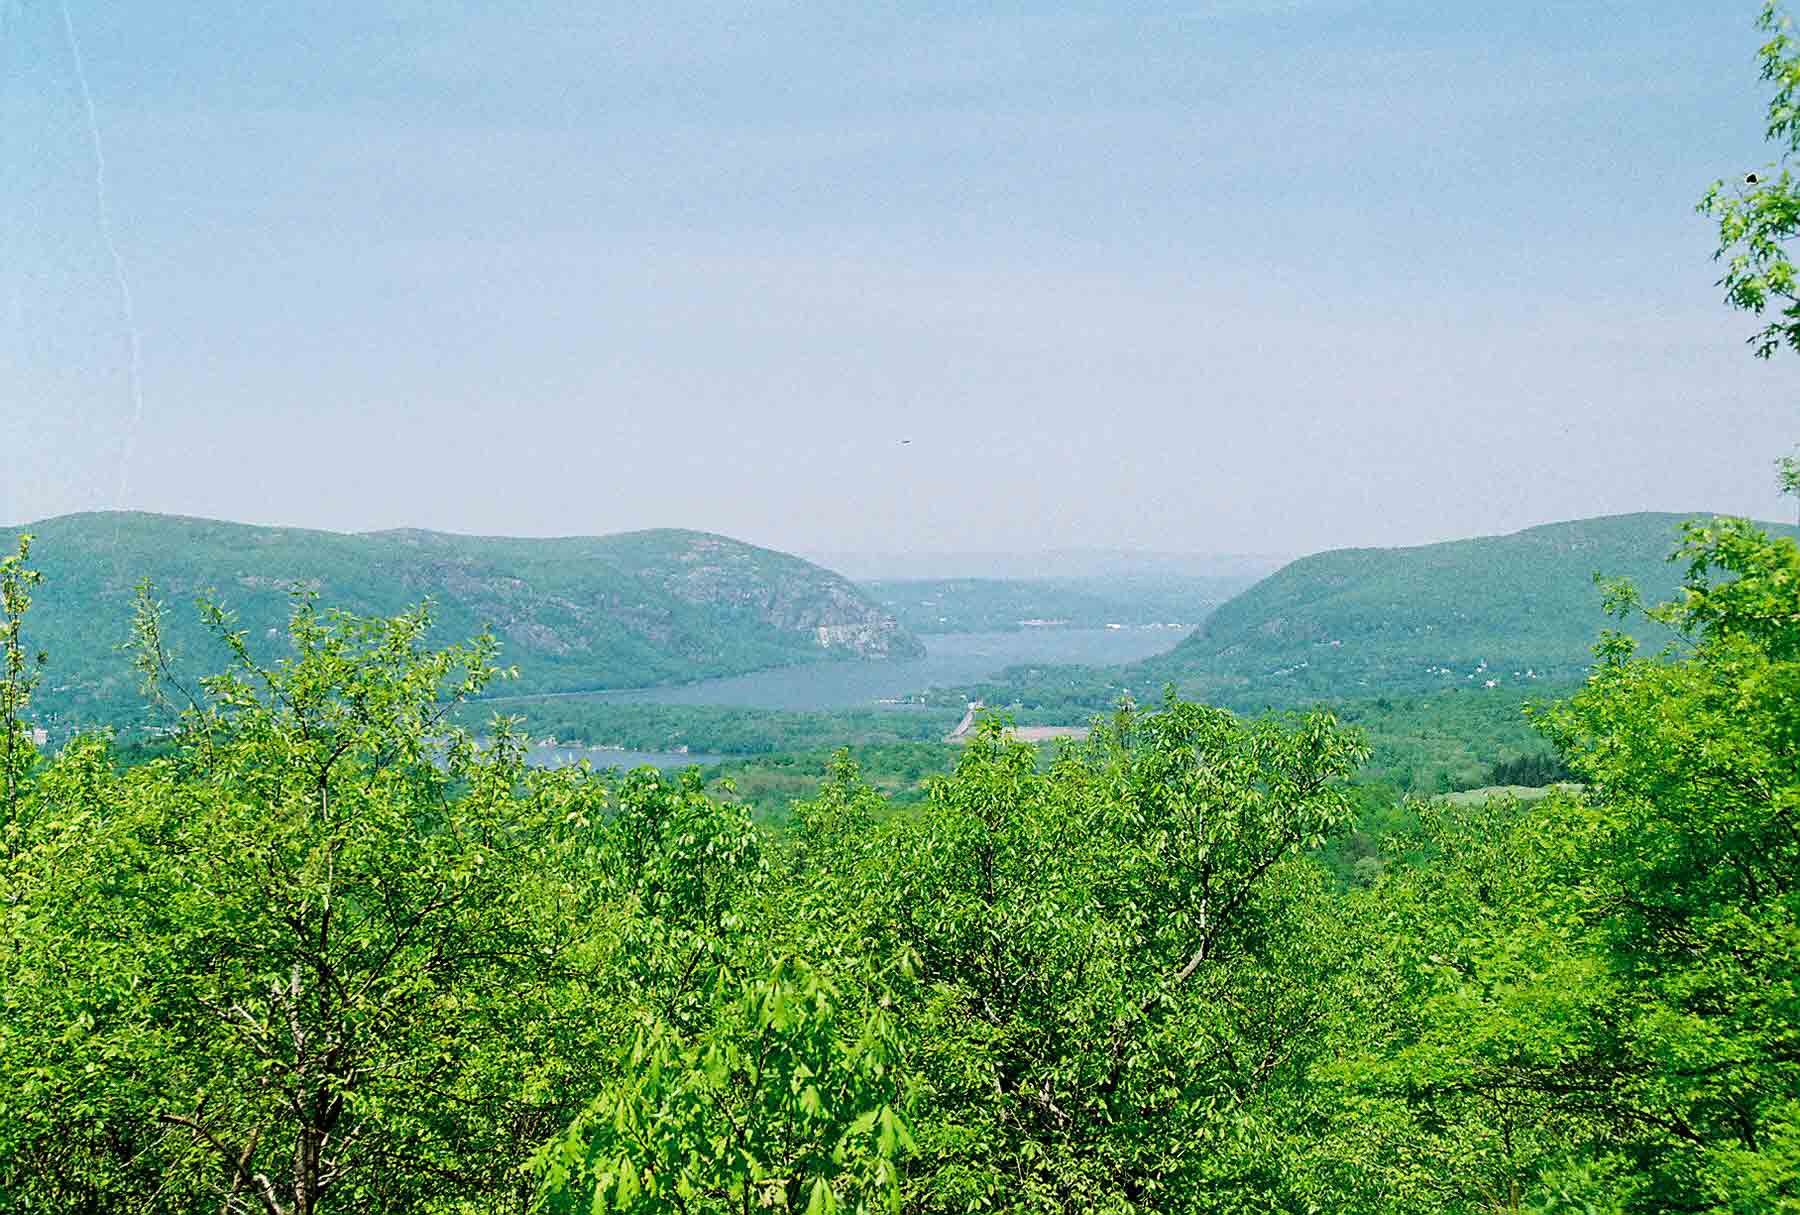 mm 2.8 - View north from Denning Hill towards the Hudson River. West Point is on the other side of the river. Courtesy dlcul@conncoll.edu